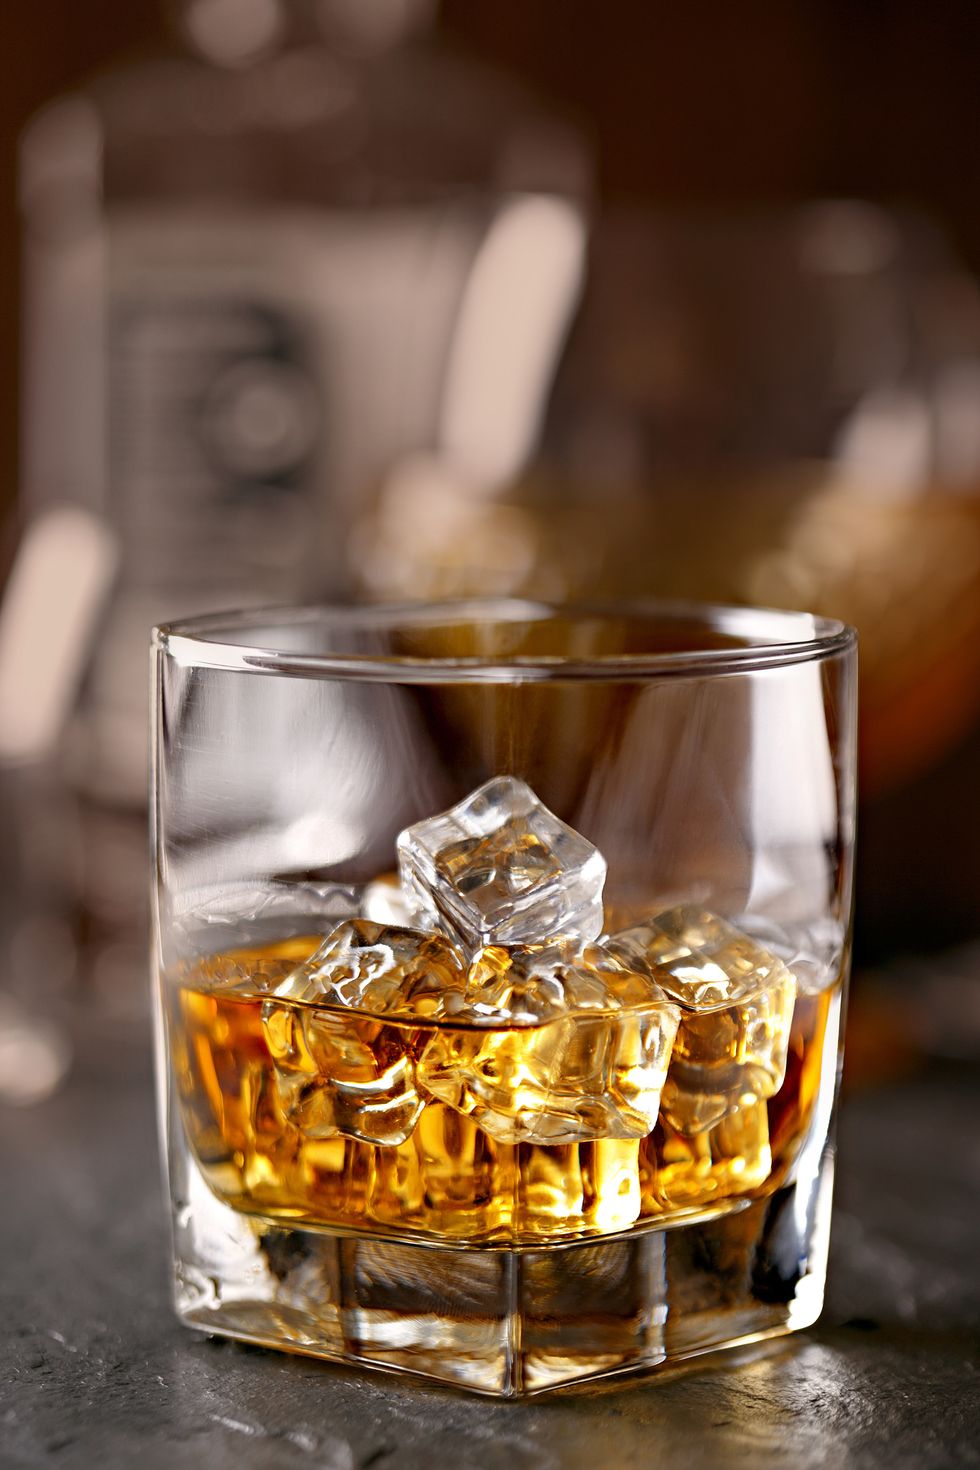 Drink, Alcohol, Old fashioned glass, Distilled beverage, Alcoholic beverage, Whisky, Godfather, Rusty nail, Liqueur, Scotch whisky, 